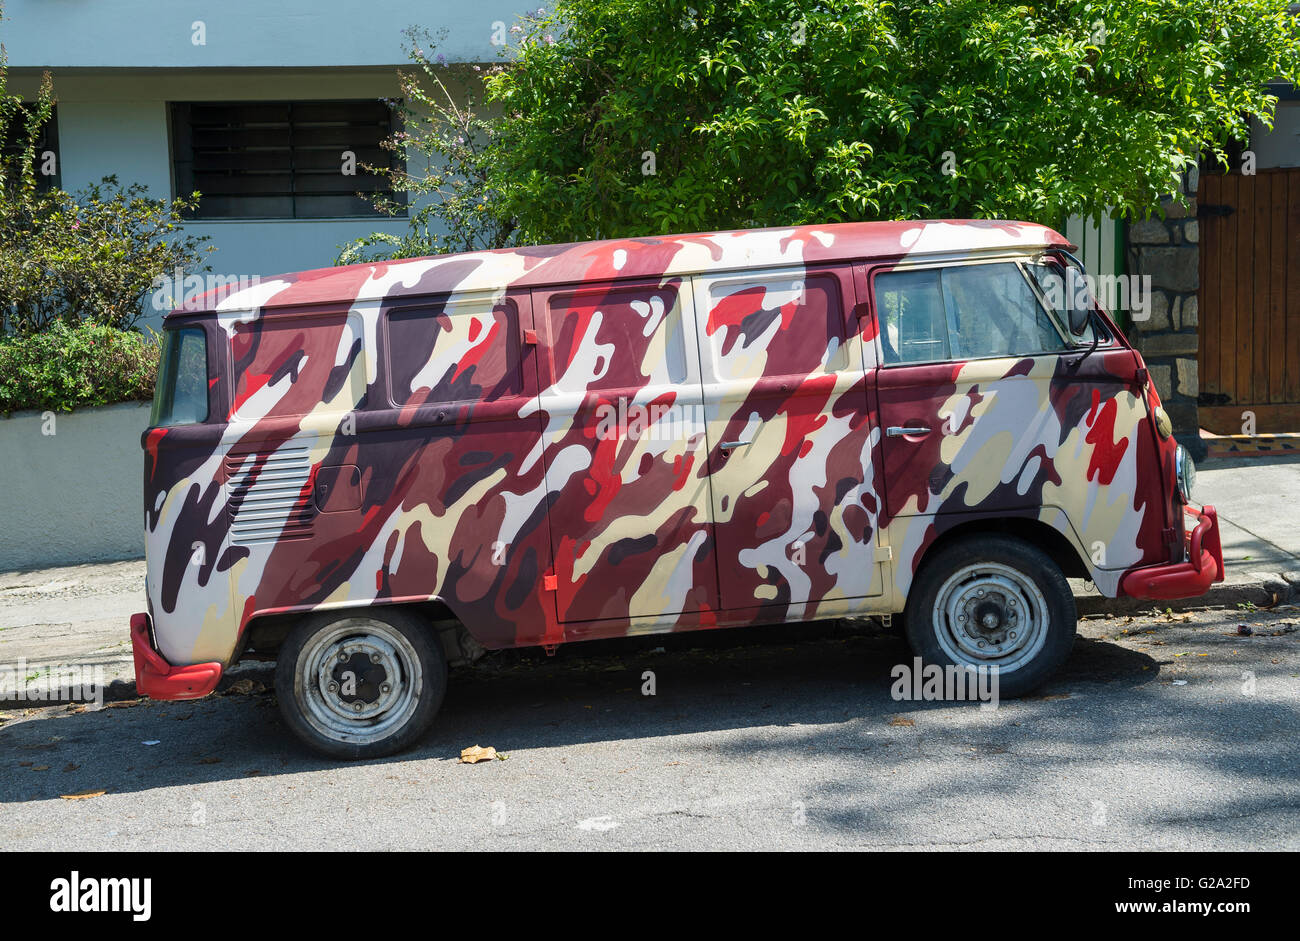 RIO DE JANEIRO - MARCH 29, 2016: A Volkswagen Kombi van, which ended production in 2013, customized in decorative camo pattern. Stock Photo